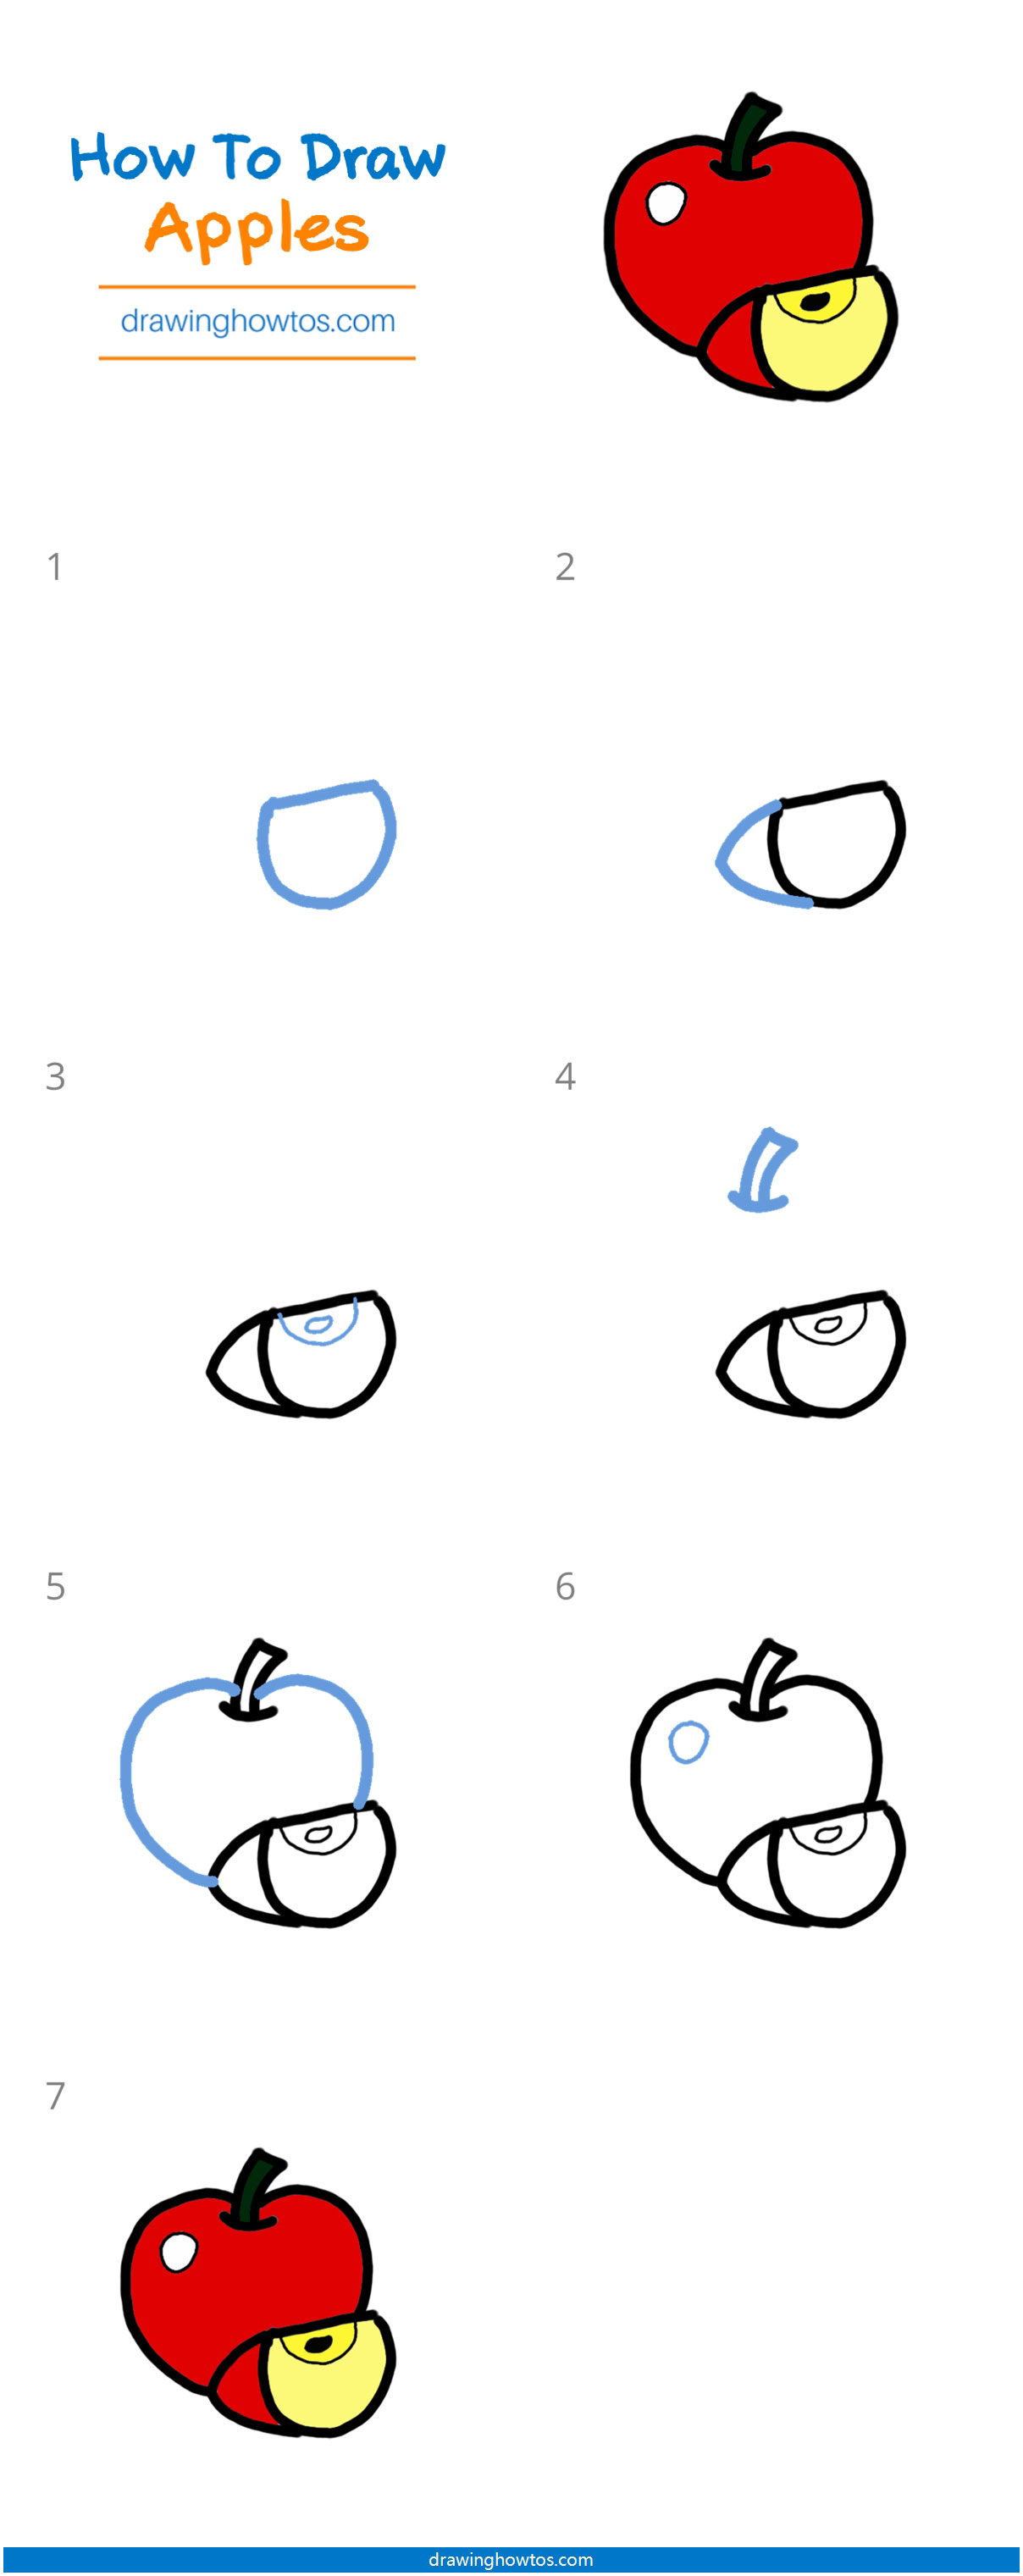 How to Draw Apples Step by Step